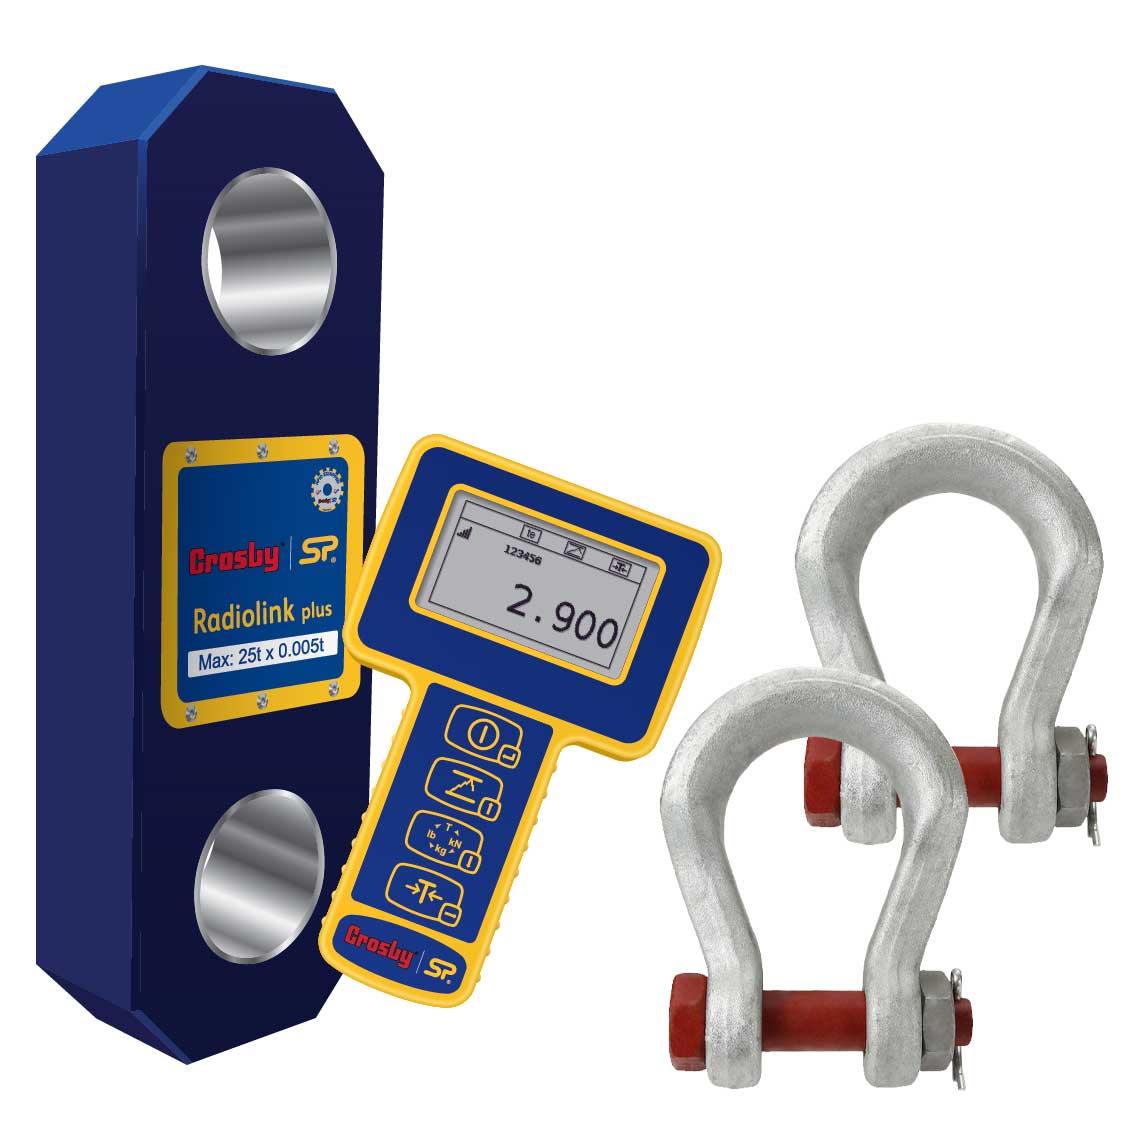 Straightpoint Radiolink Plus with two Crosby Shackles Kit image 1